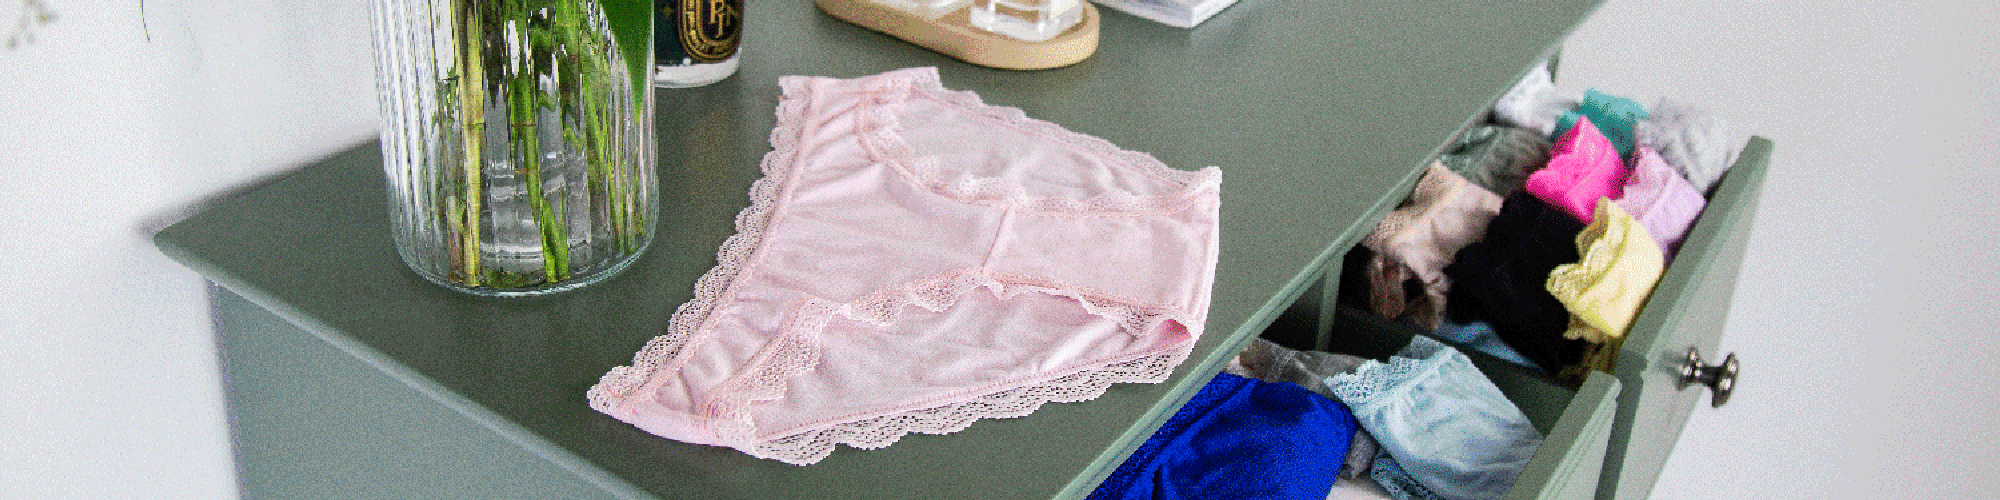 Knickers being folded on top of a chest of drawers